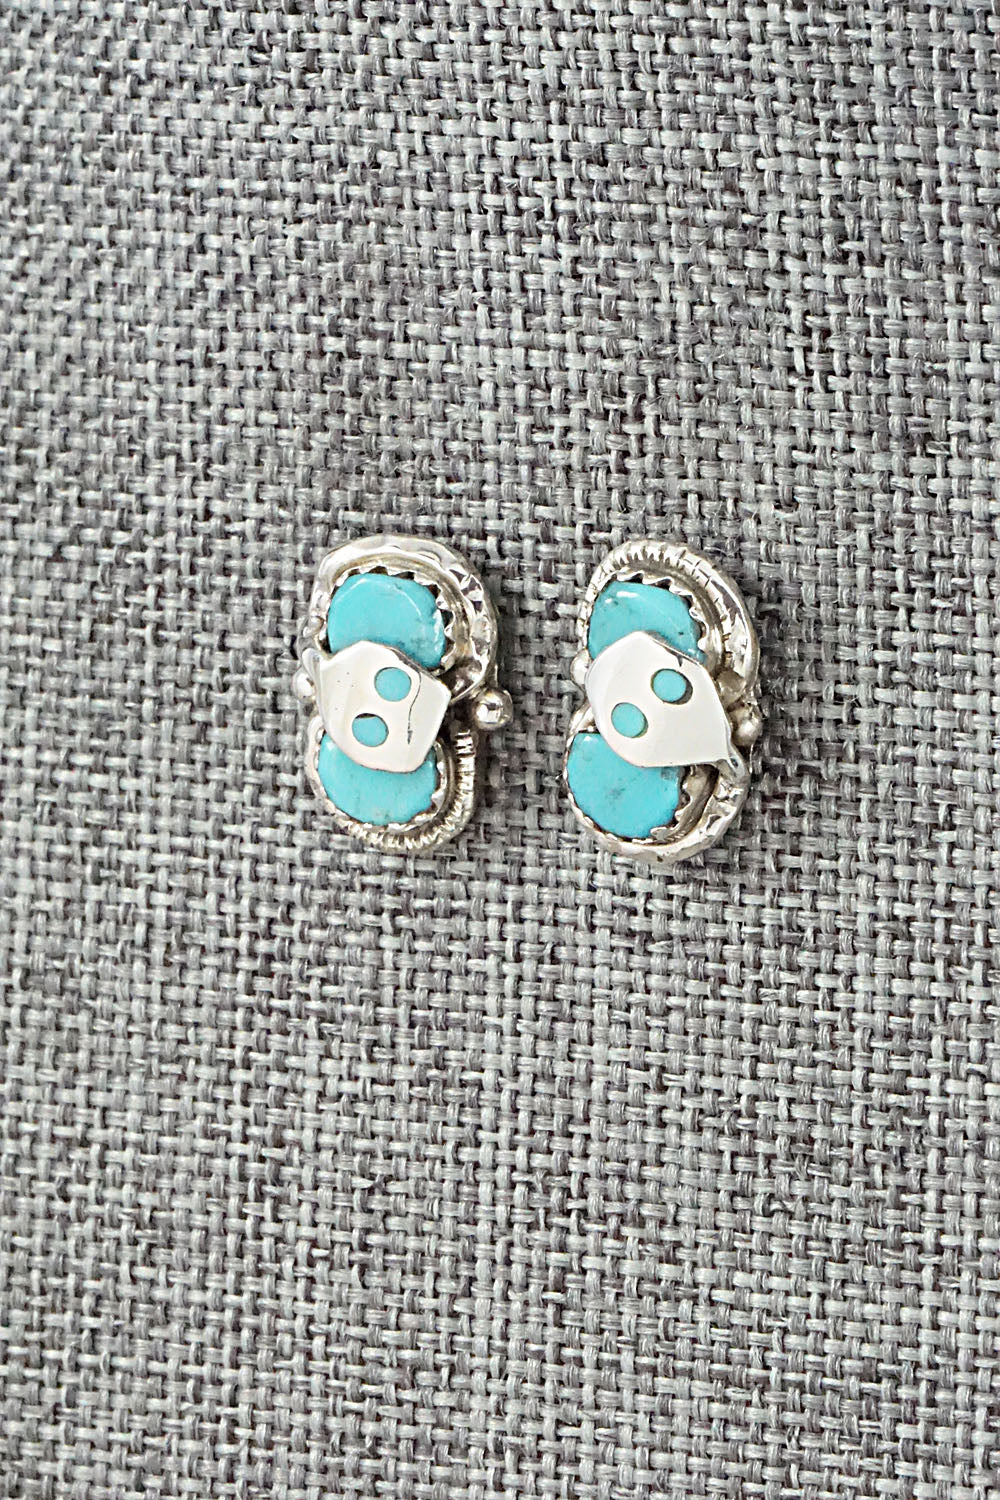 Turquoise & Sterling Silver Earrings - Joy Calavaza